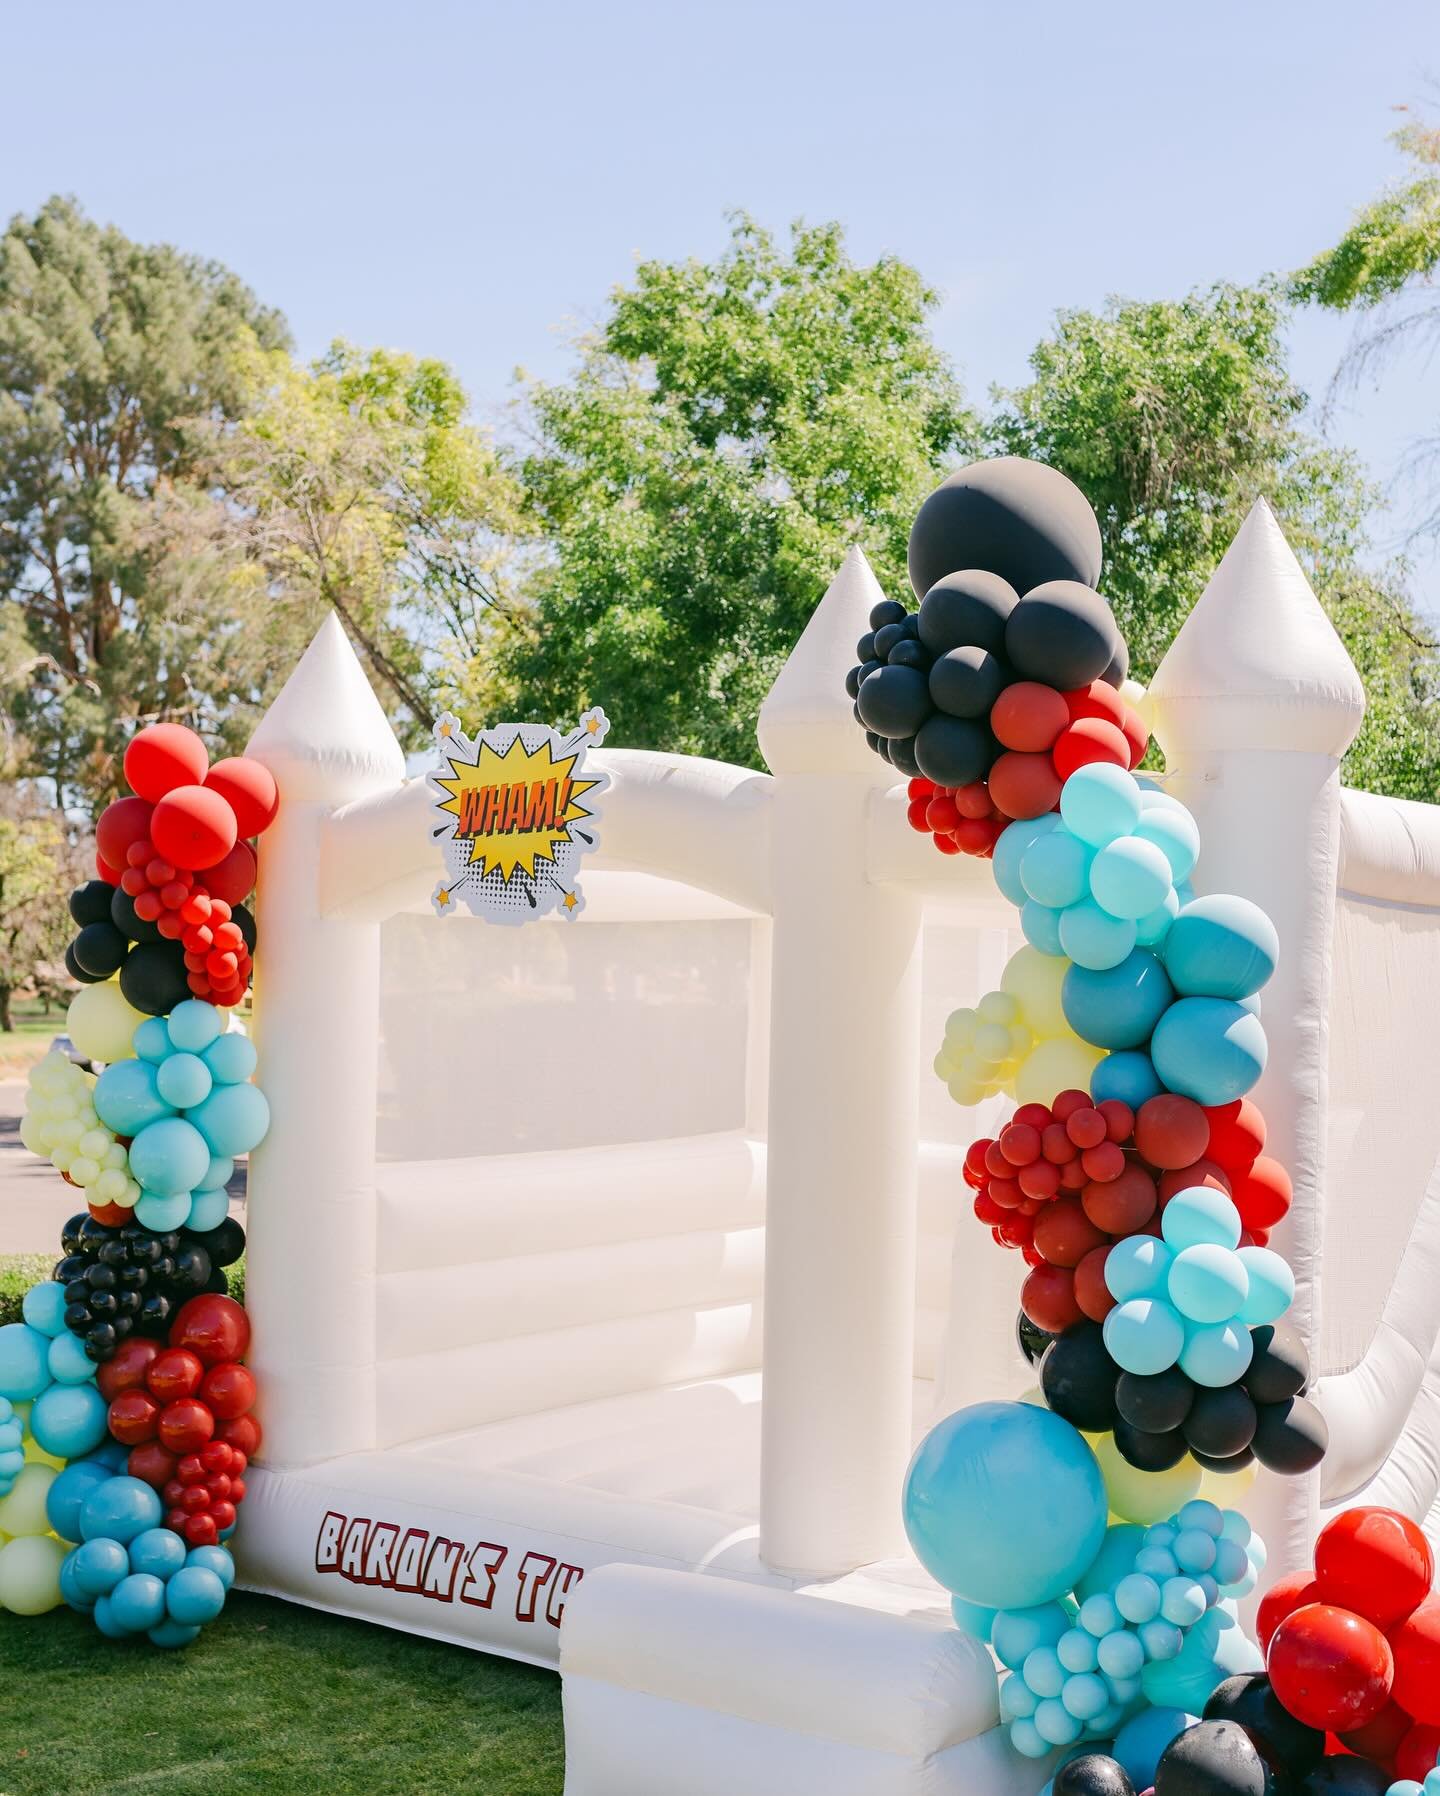 CALLING ALL SUPERHEROES 💥an epic party for a super cool three year old with the most amazing vendor team! ⚡️

Design and Coordination: @createandinflateevents
Balloons: @createandinflateevents
Fabrication: @nobledizzigns 
Vinyl, Cape customization, 